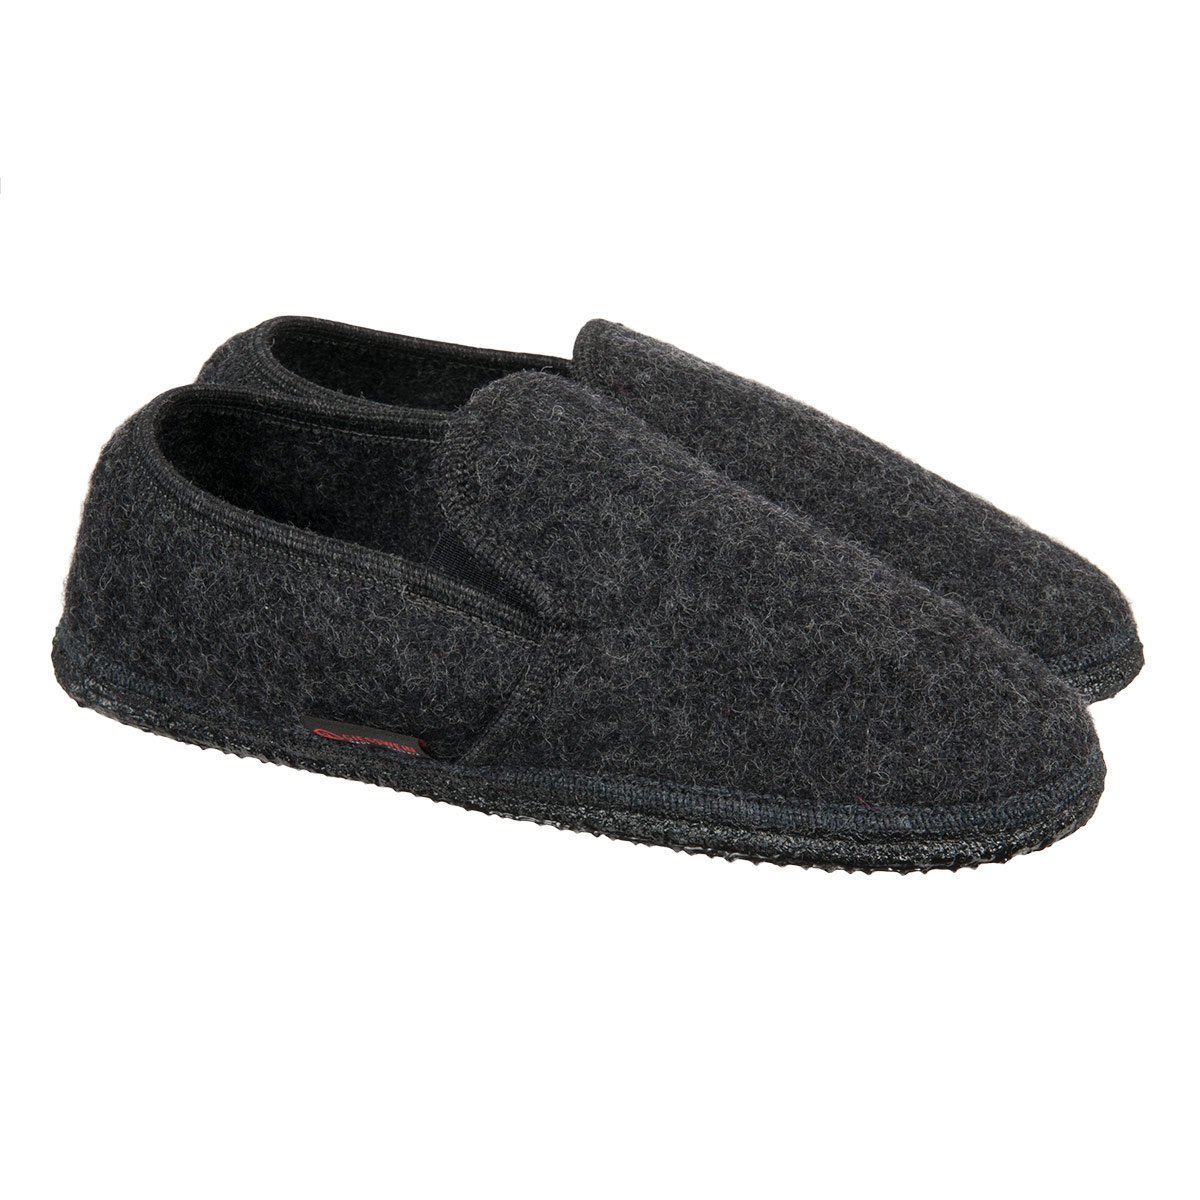 all wool slippers